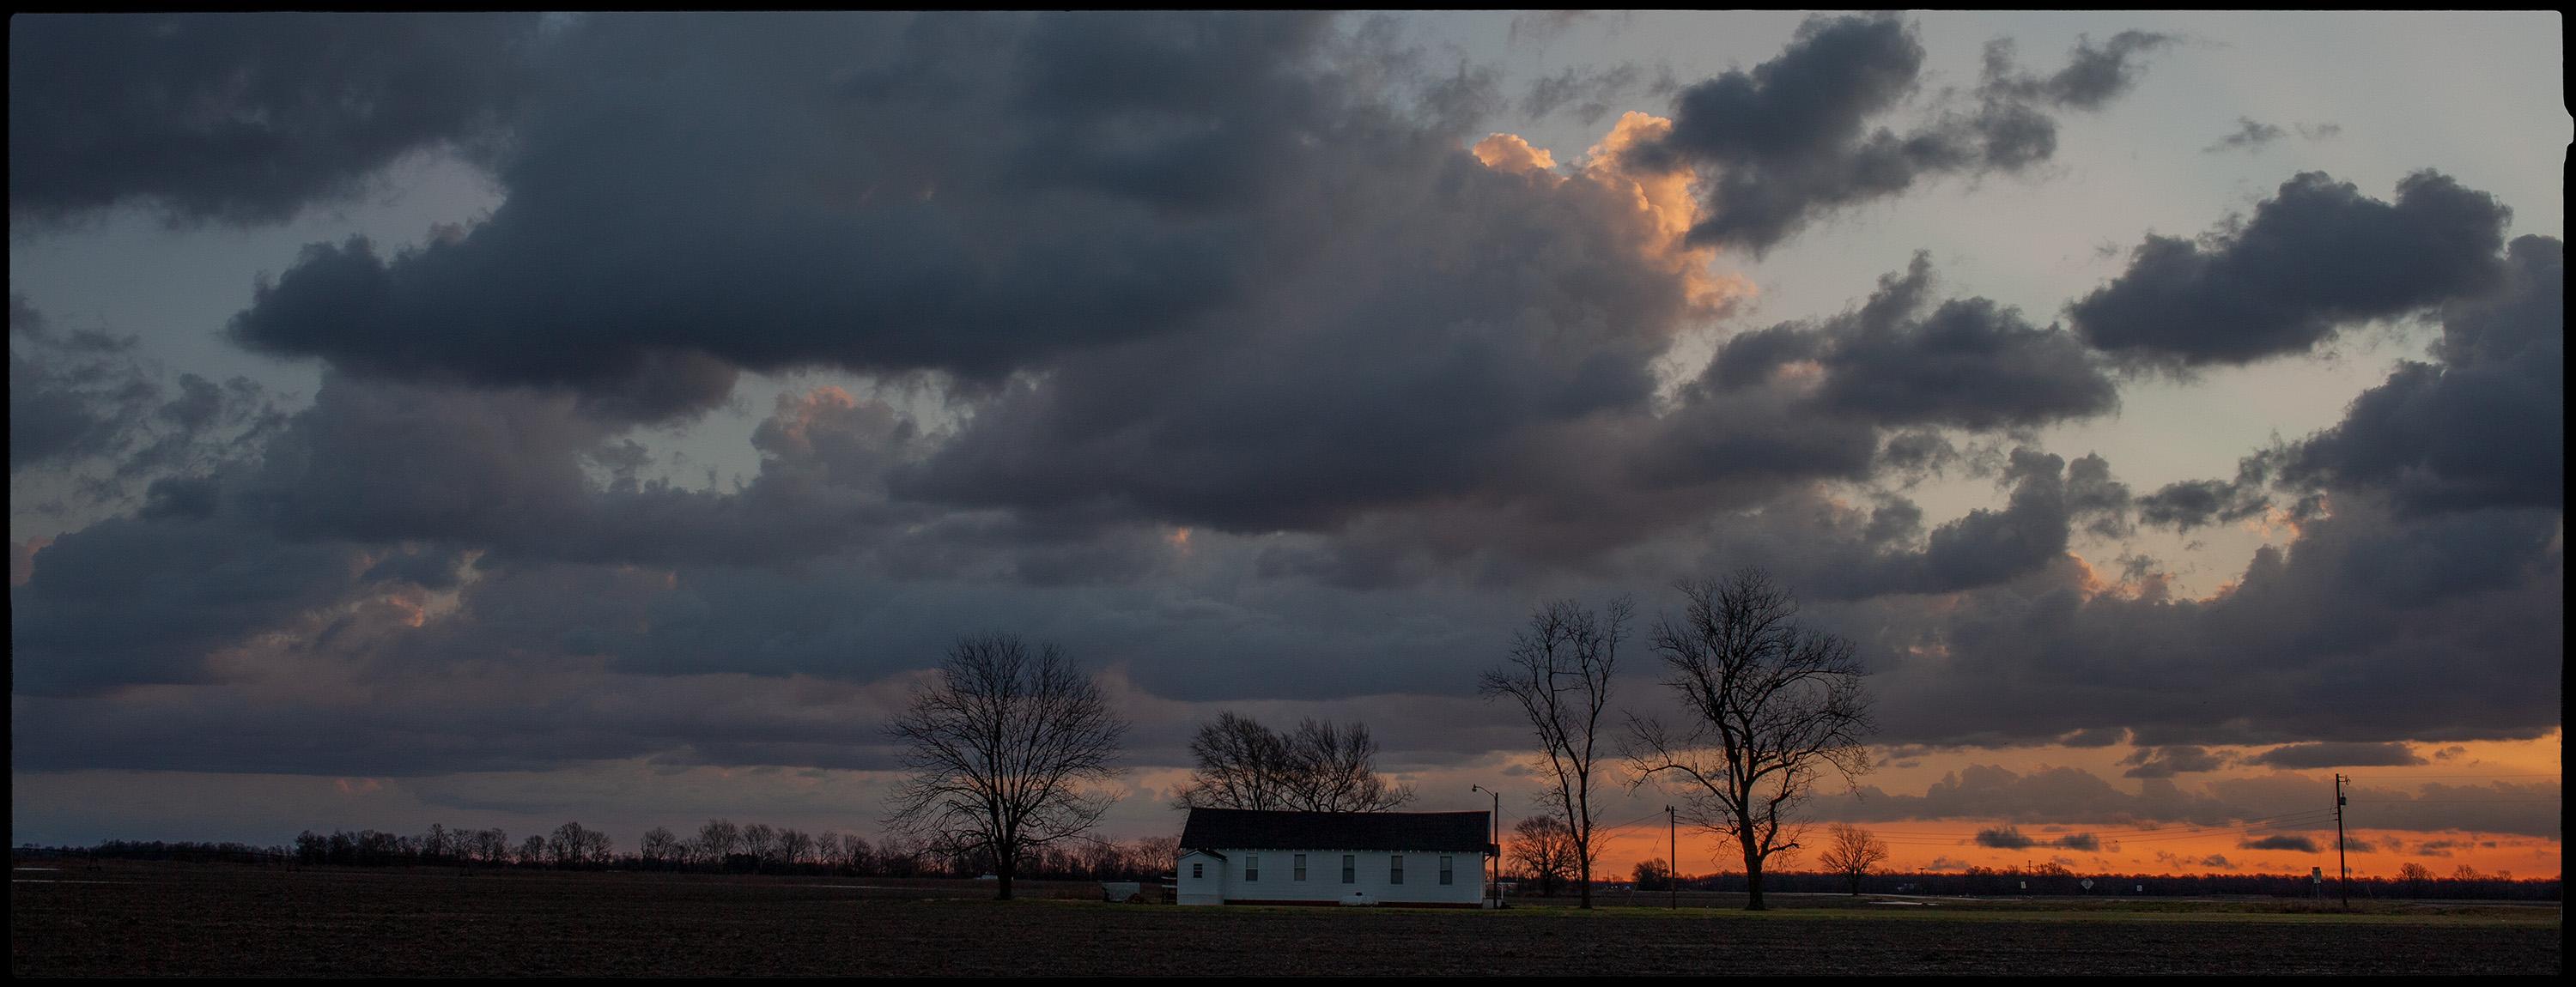 Jerry Siegel Landscape Photograph - "Day End, Tallahatchie County, MS" - Southern Photography - Christenberry